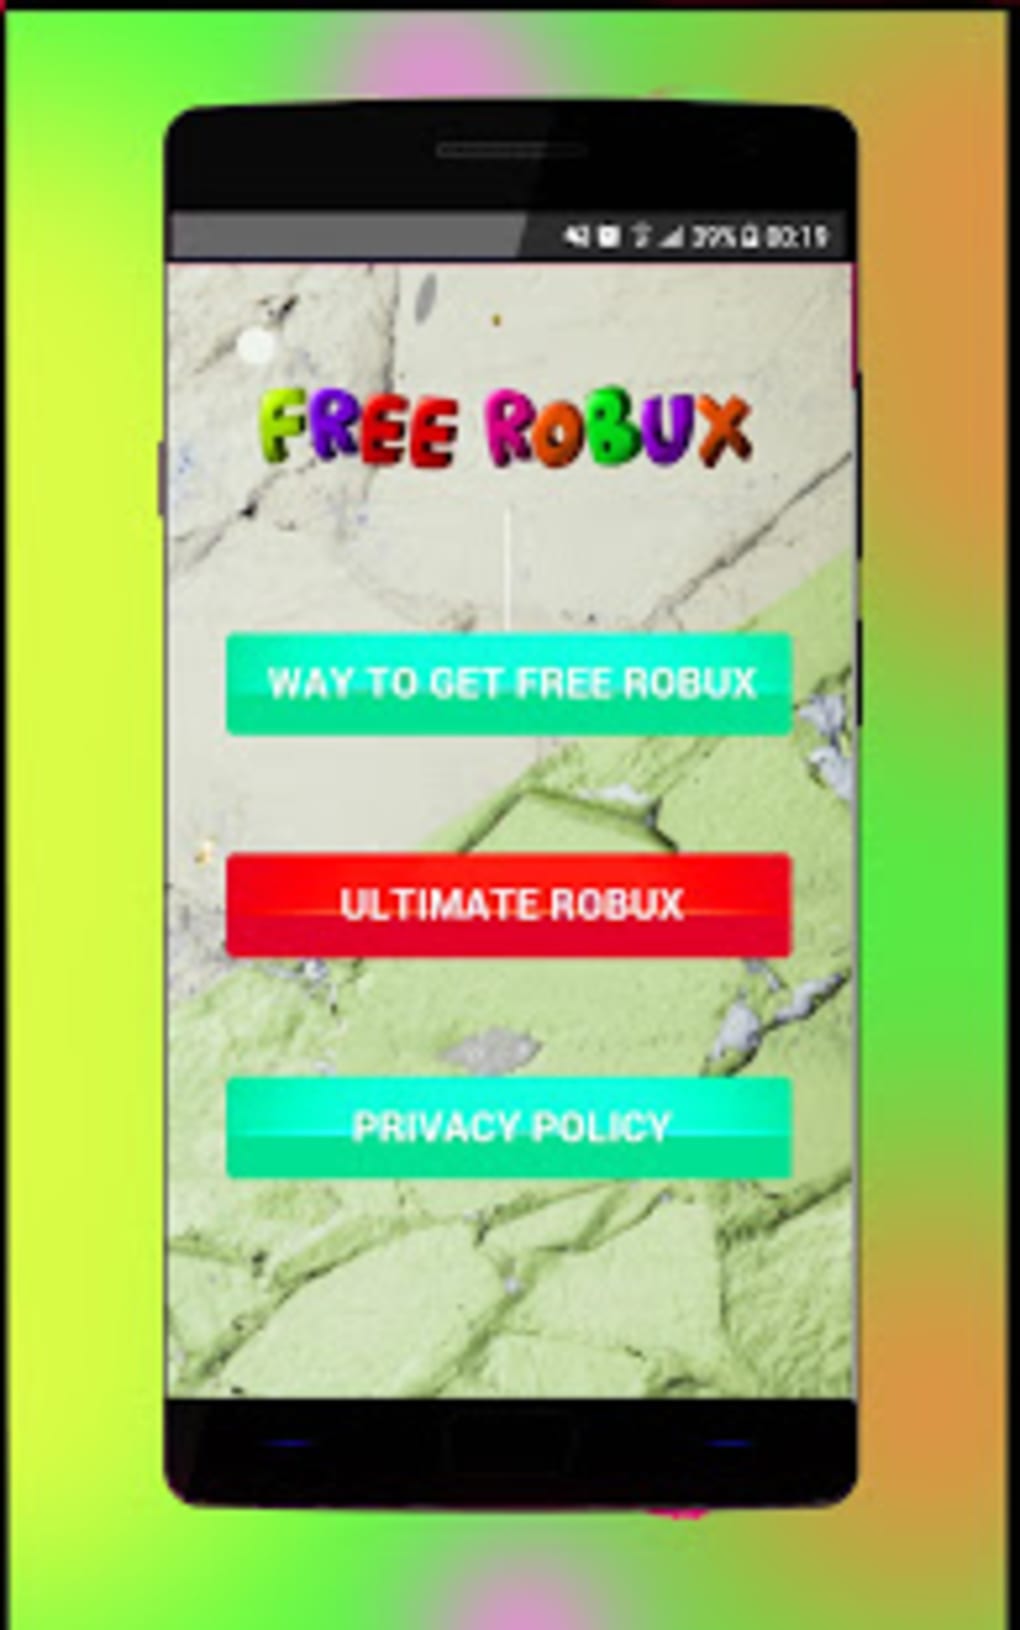 How To Get Free Robux With A